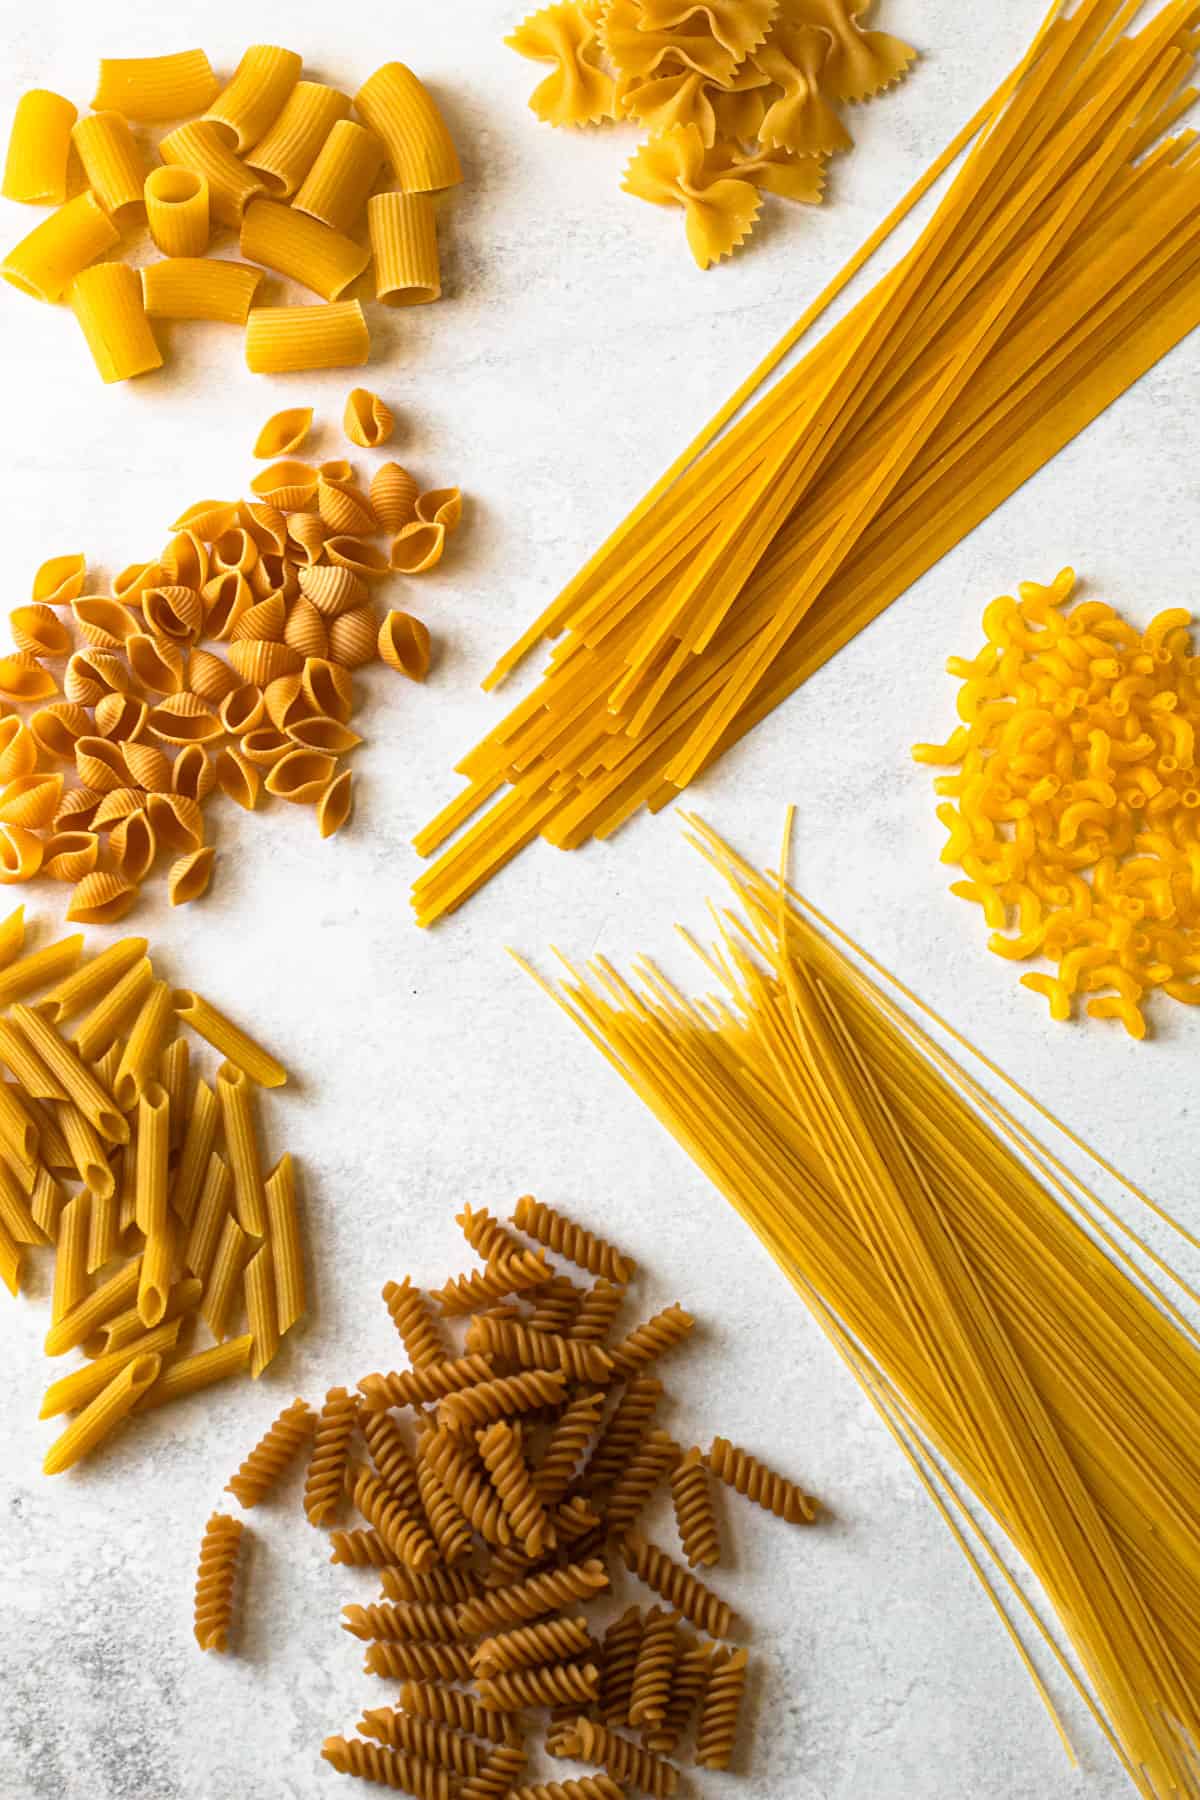 How to Make One-Pot Pasta With Practically Any Pasta - The New York Times